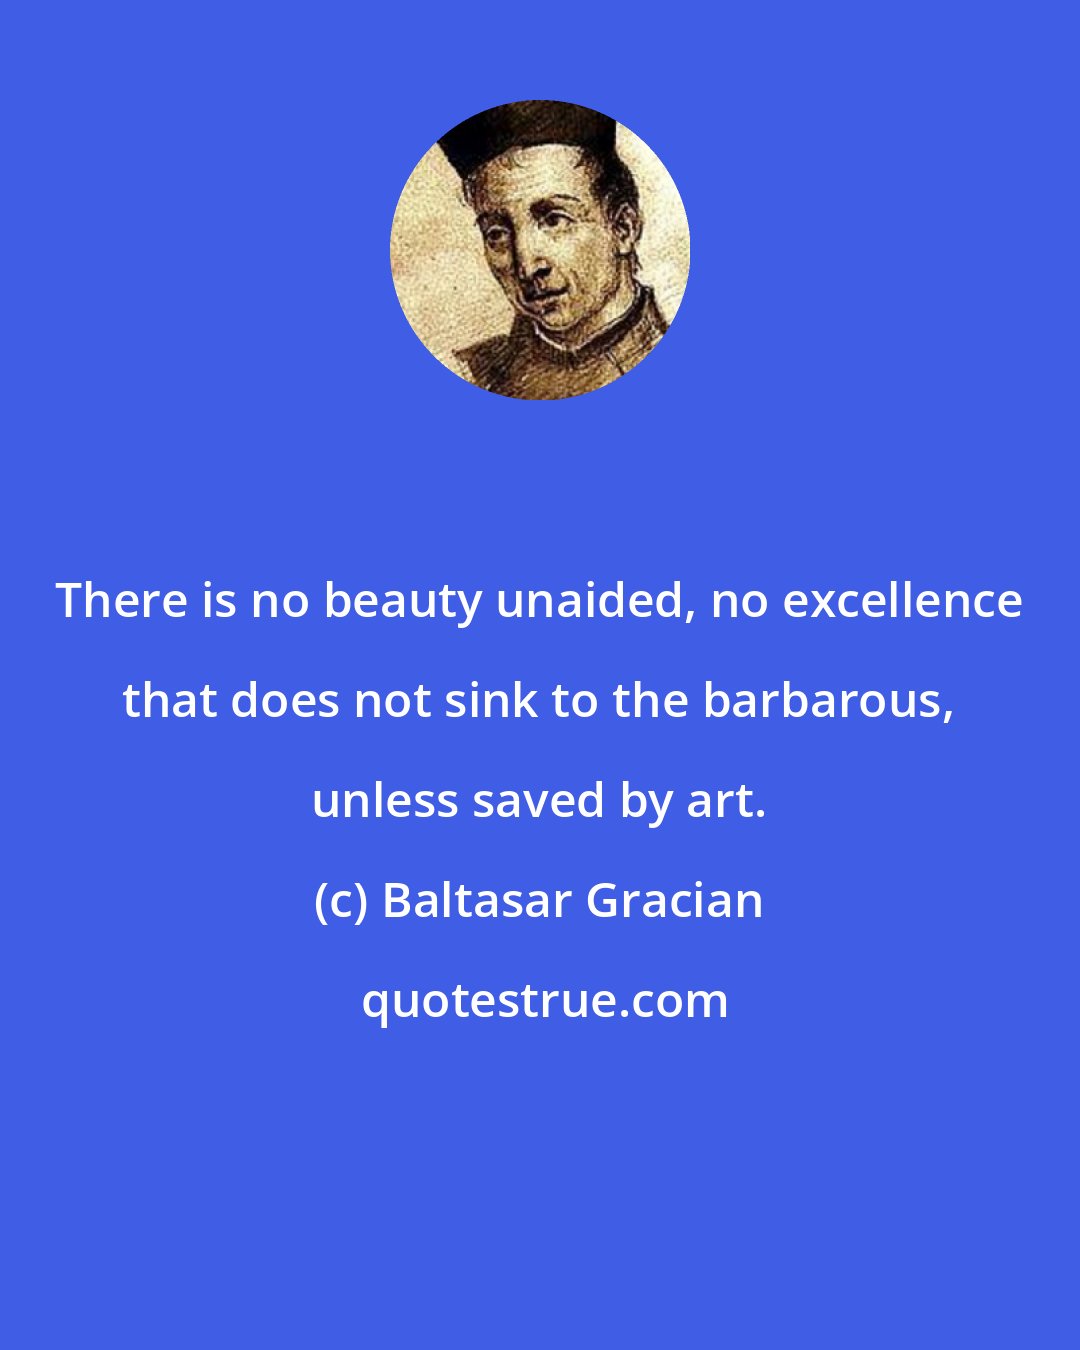 Baltasar Gracian: There is no beauty unaided, no excellence that does not sink to the barbarous, unless saved by art.